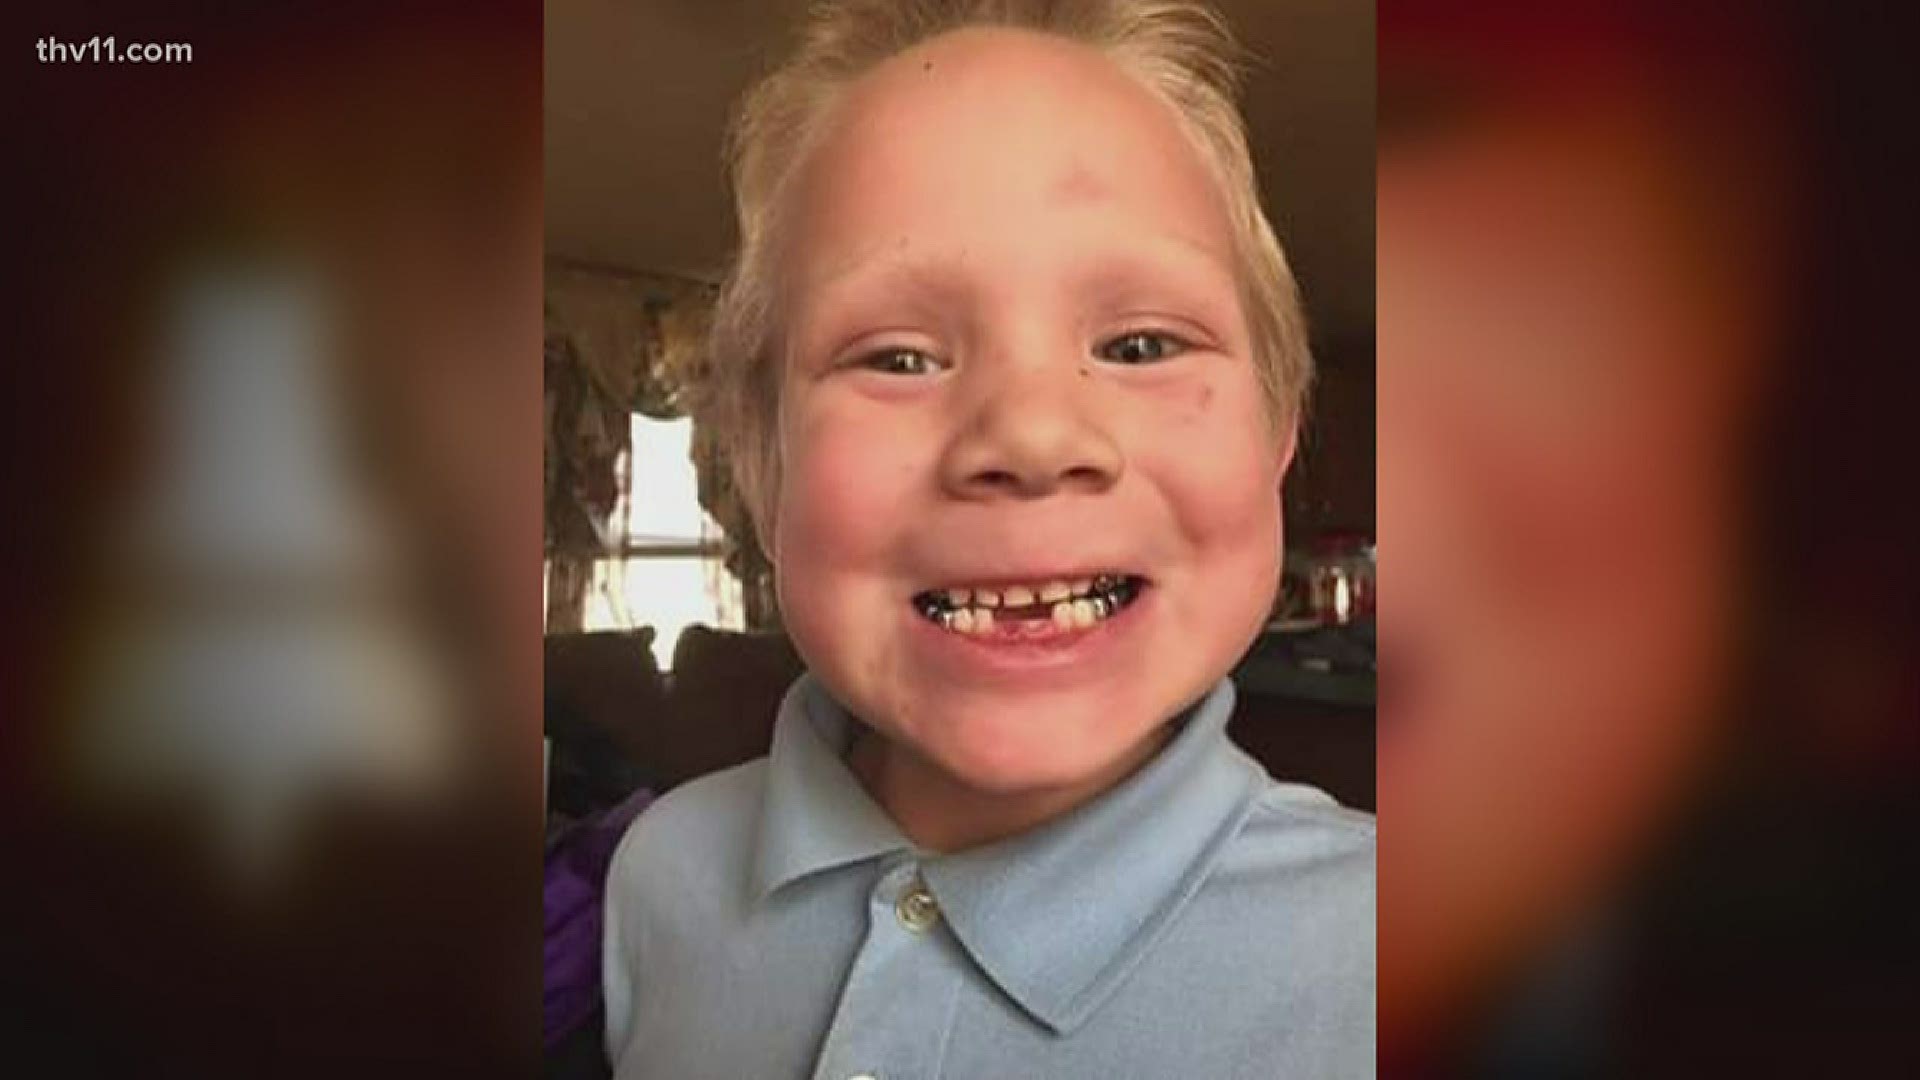 The body of a Little Rock boy, who drowned at a Texas beach over the weekend, is now home in Arkansas. Now, Micah Batson's family prepares to lay him to rest.